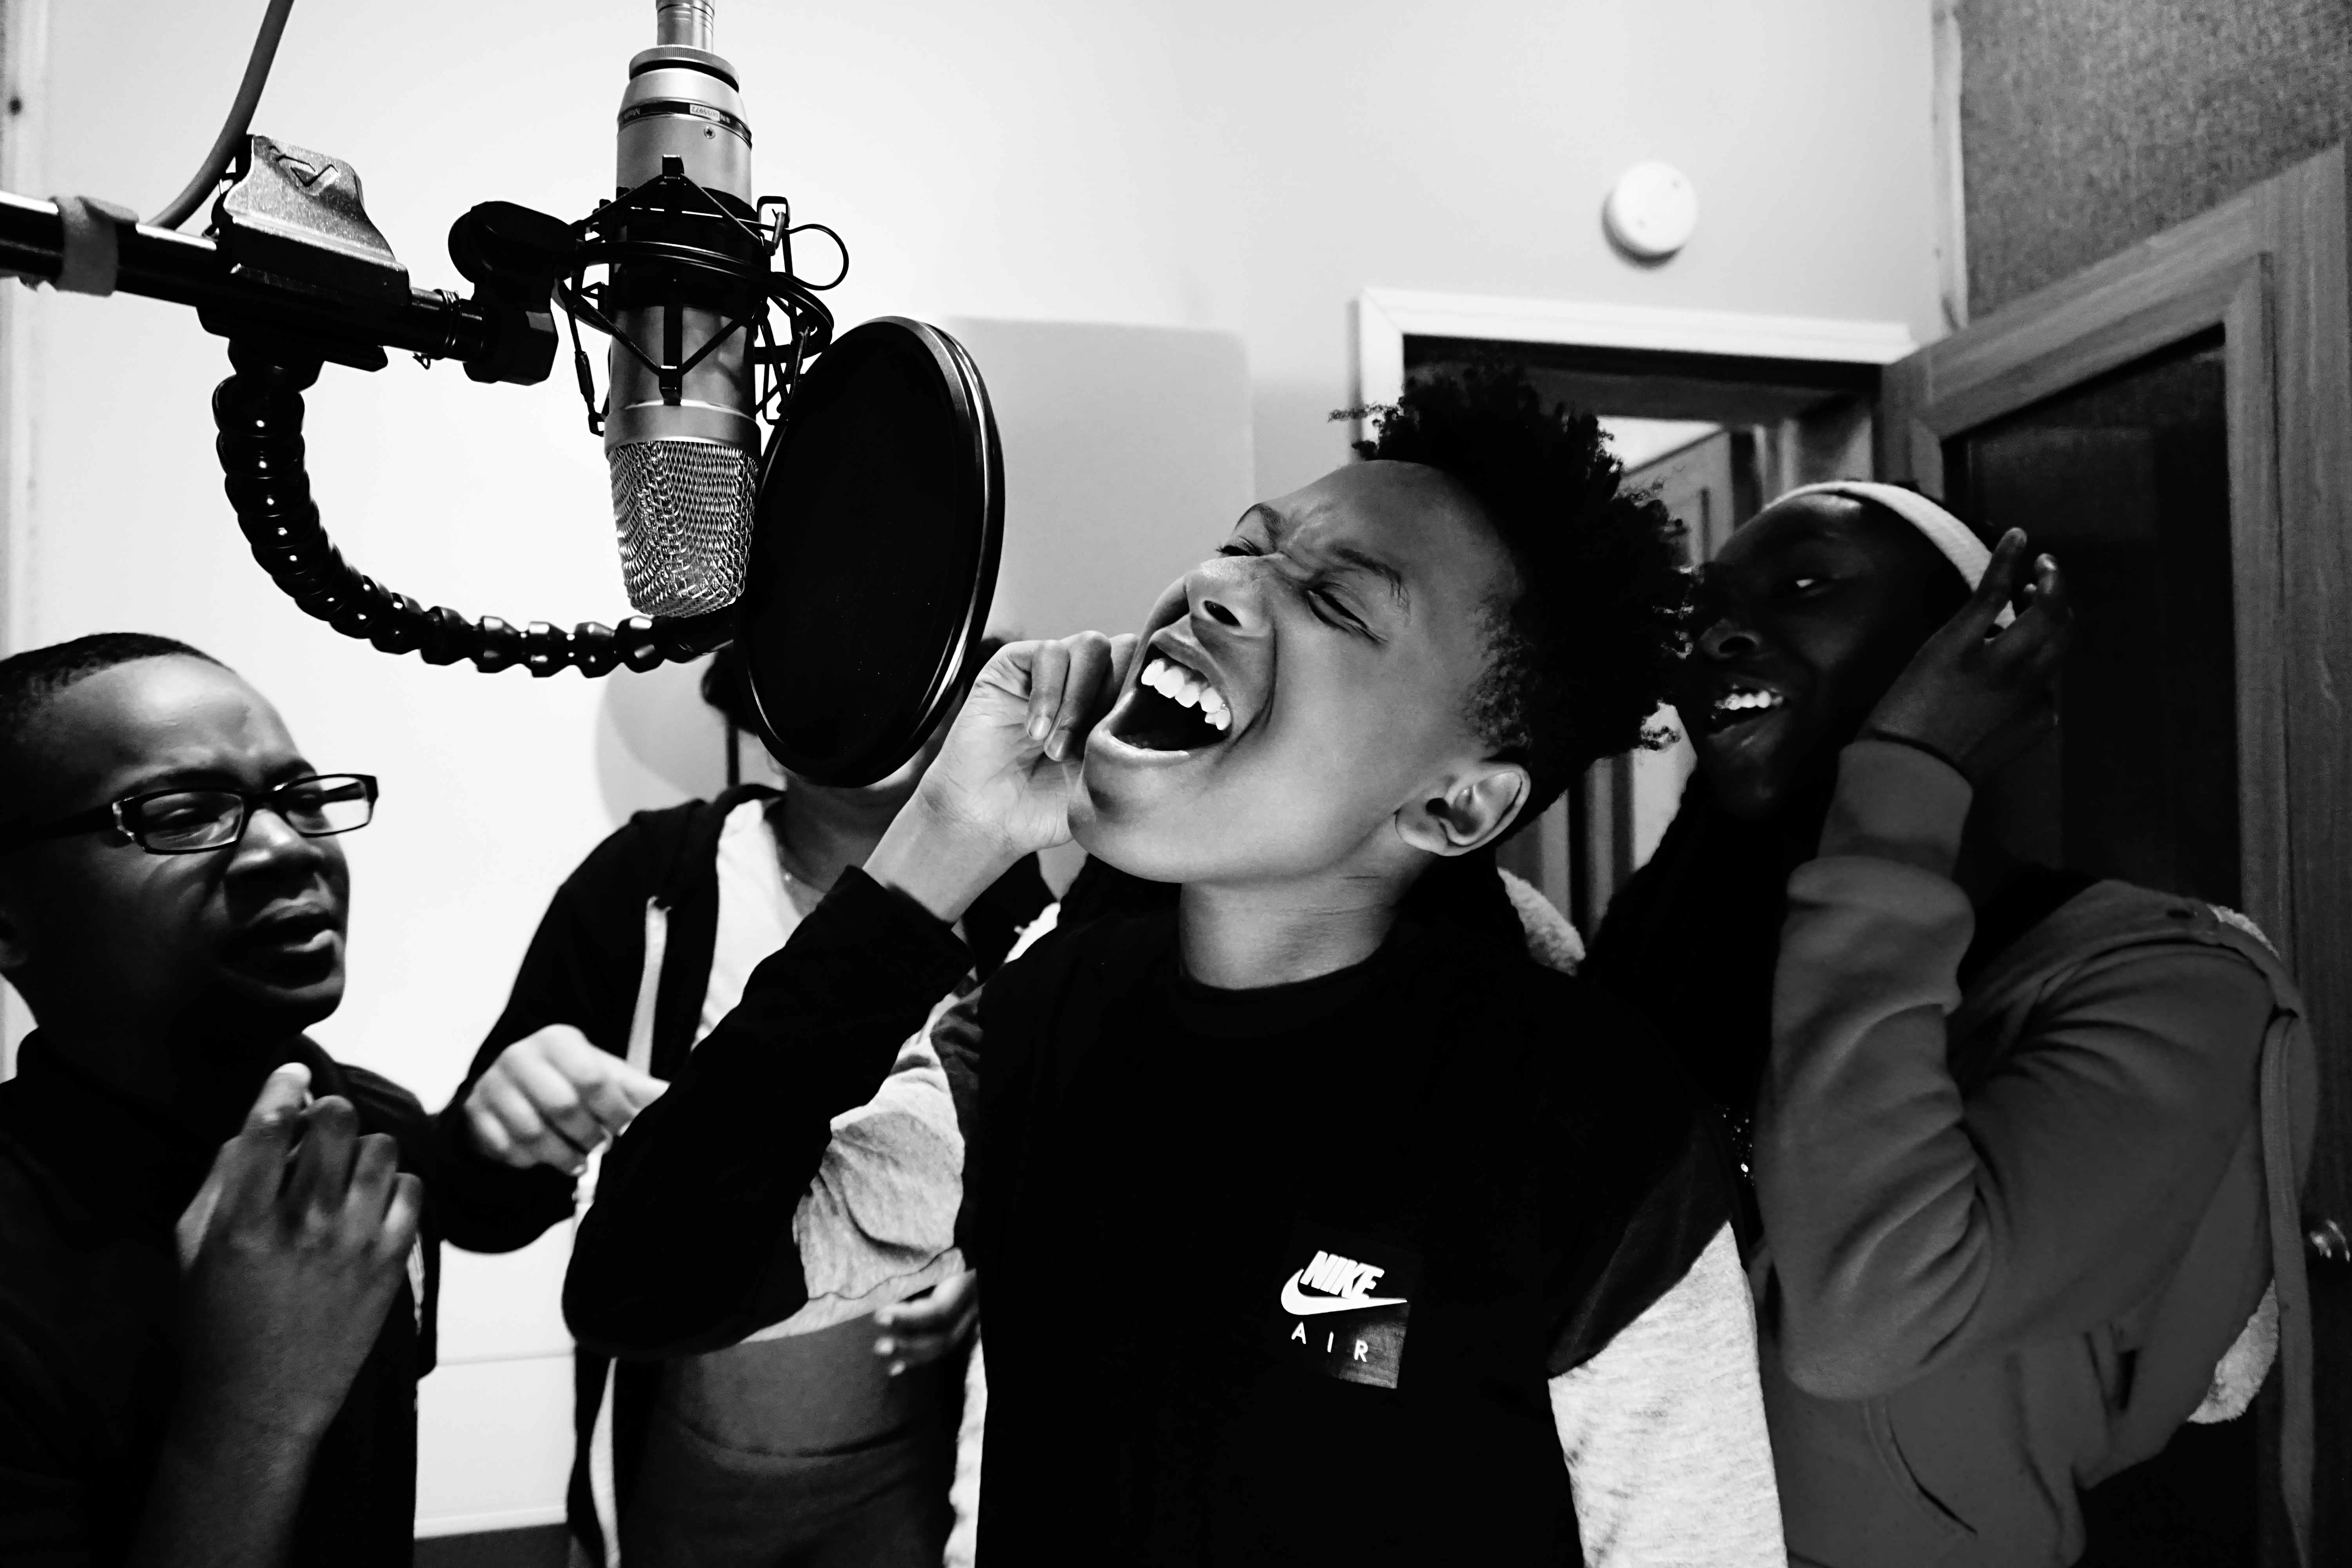 Black & white photo of children singing into microphone in recording studio booth